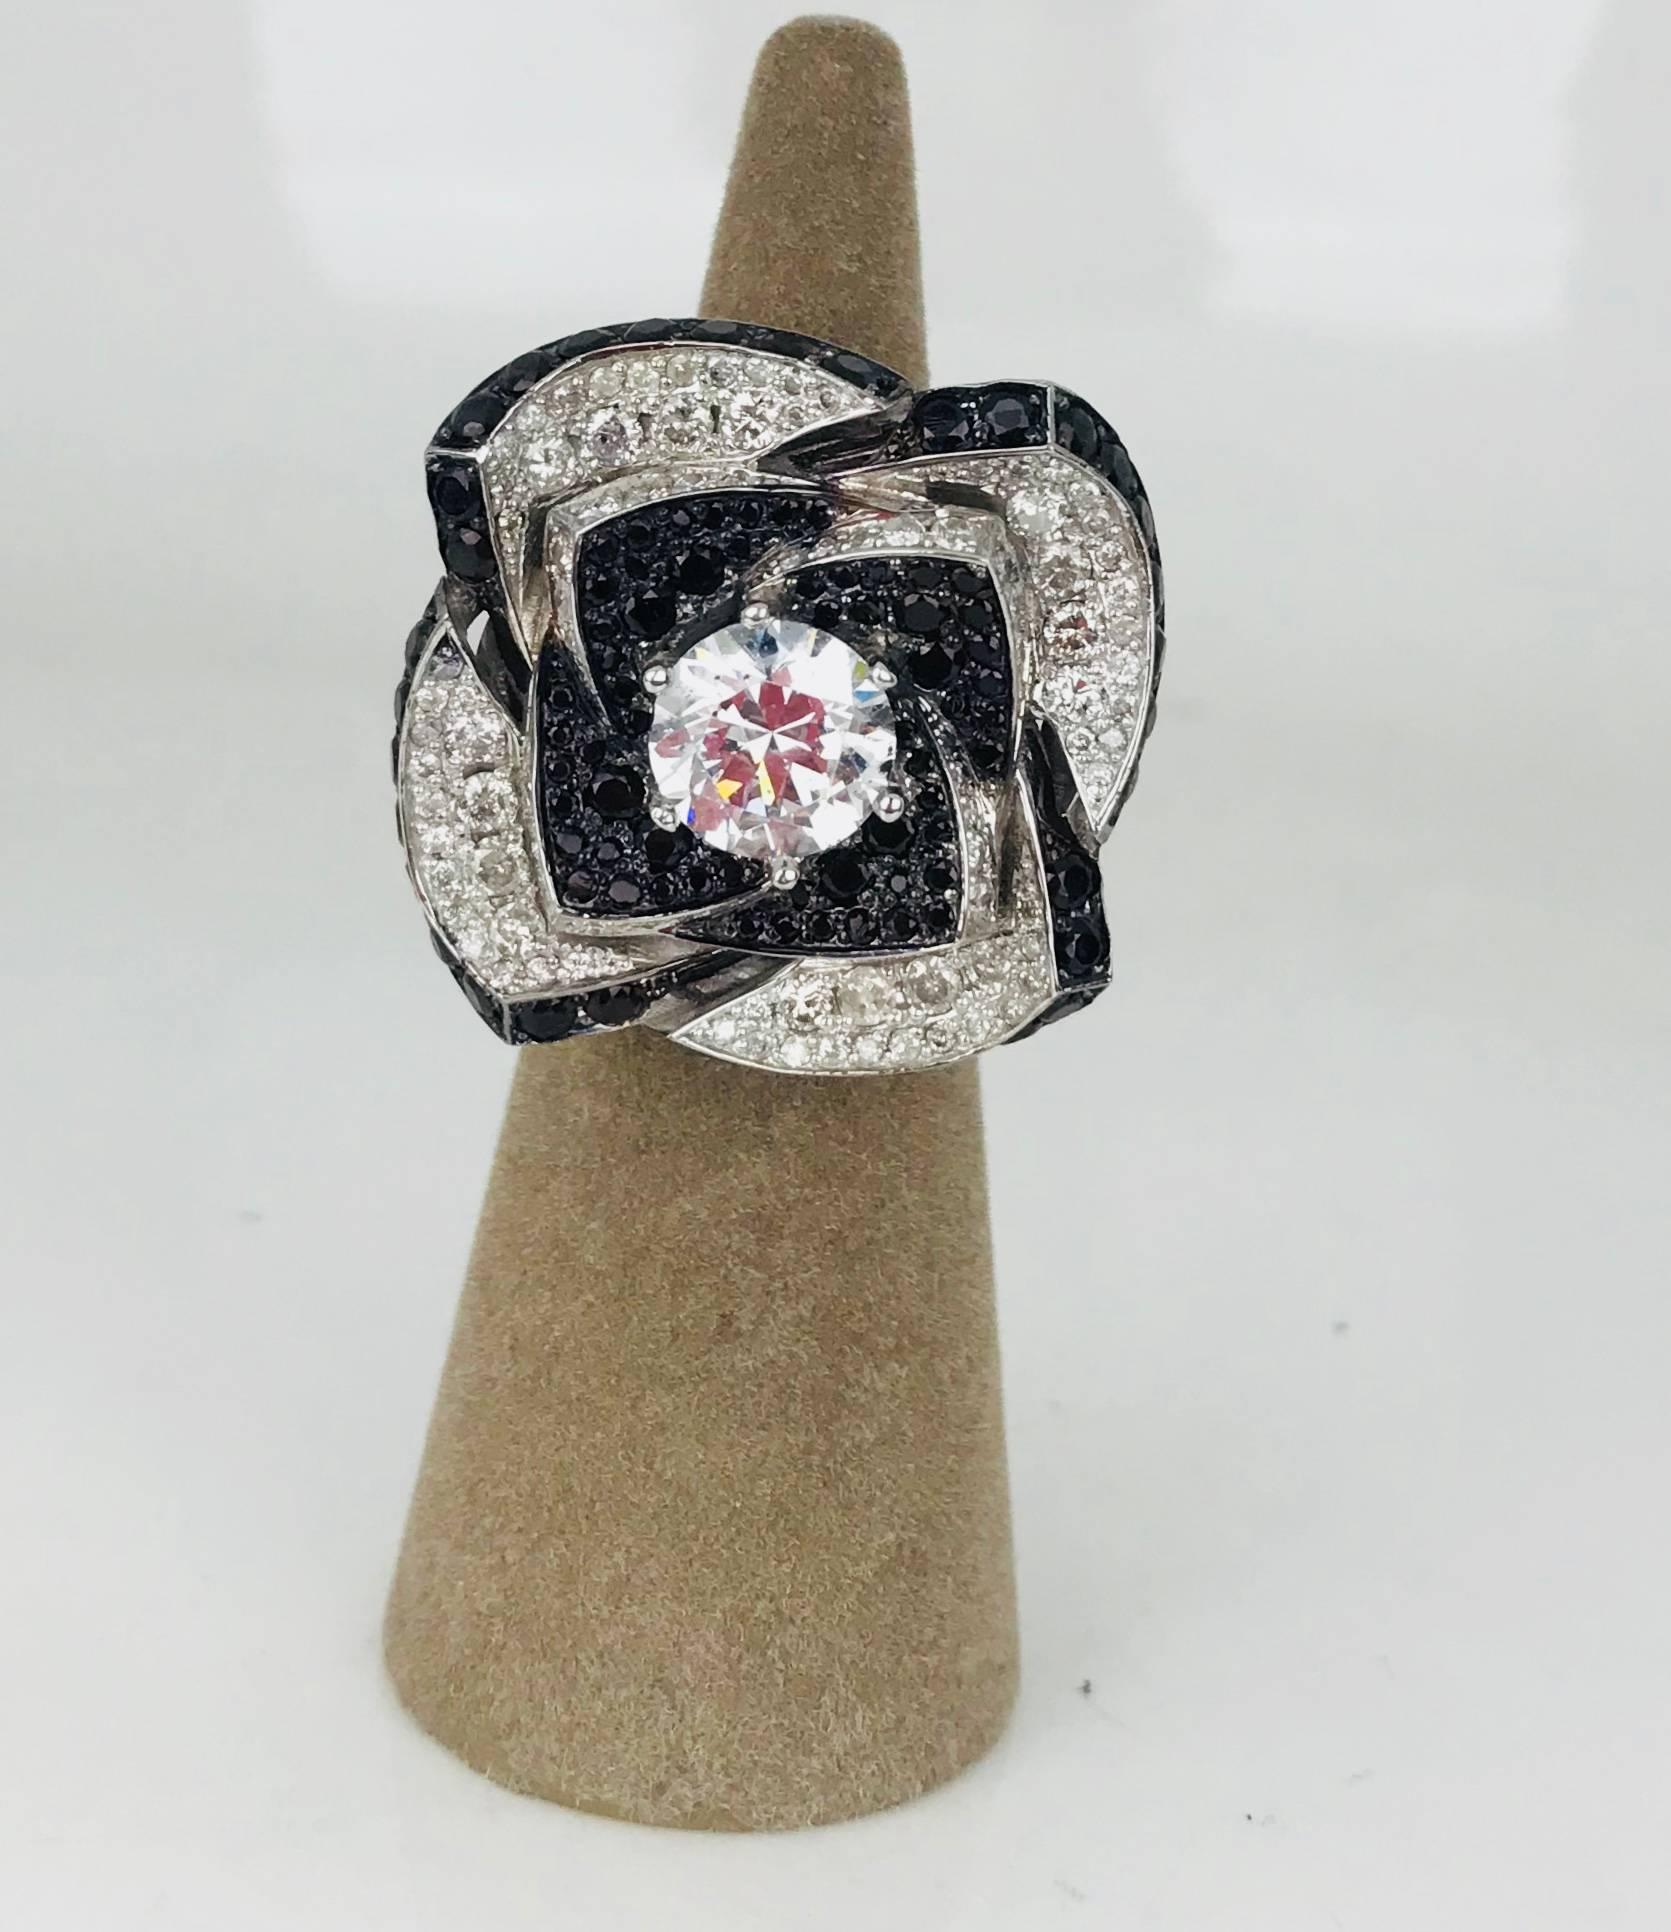 Diamond & black spinel flower ring with 7.75 carat diamonds and 5 carats spinel in a Modern style design.
A Hollywood- style ring with diamonds & black spinel set as a floral design in 14 karat white gold. 
The underneath layer of metal, under the